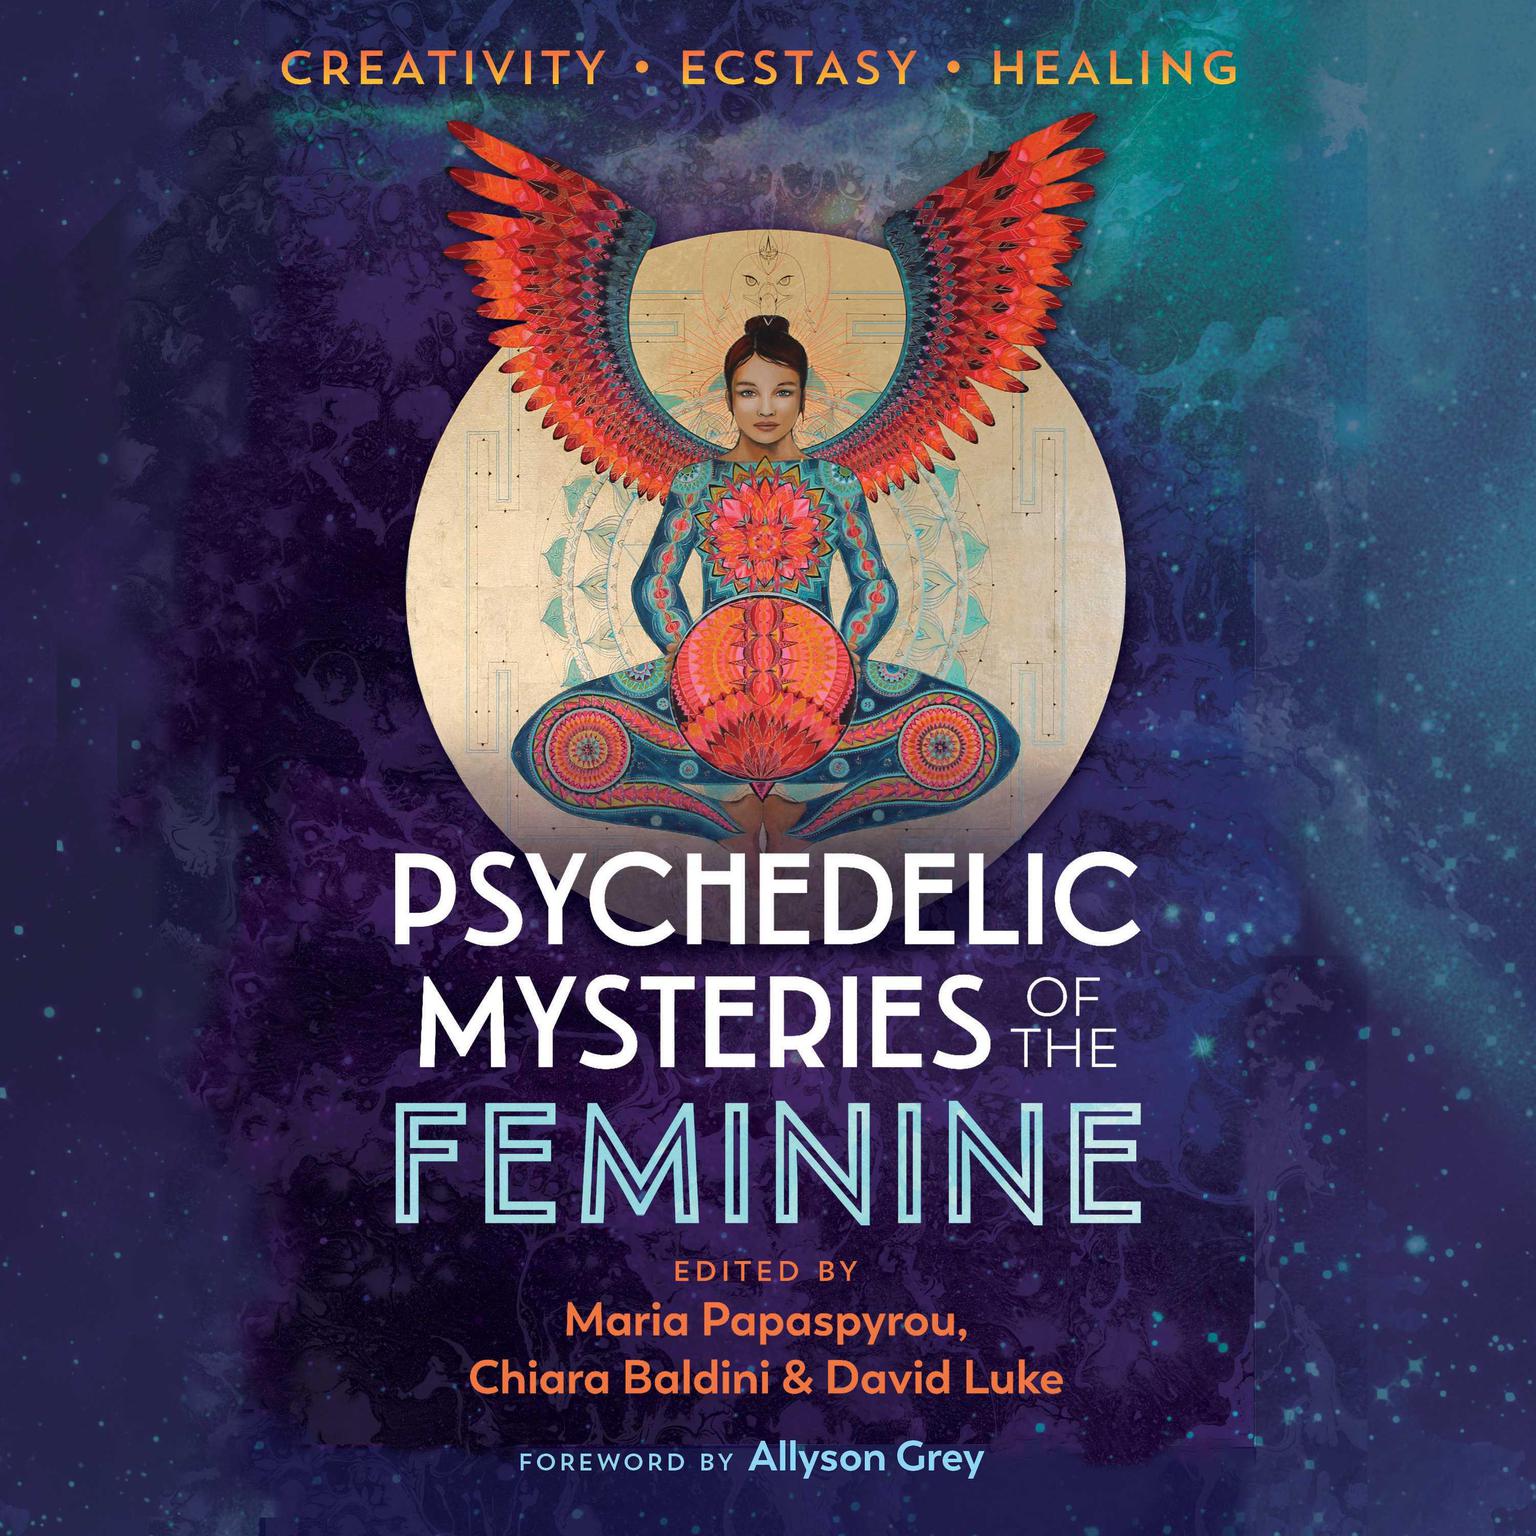 Psychedelic Mysteries of the Feminine: Creativity, Ecstasy, and Healing Audiobook, by Maria Papaspyrou